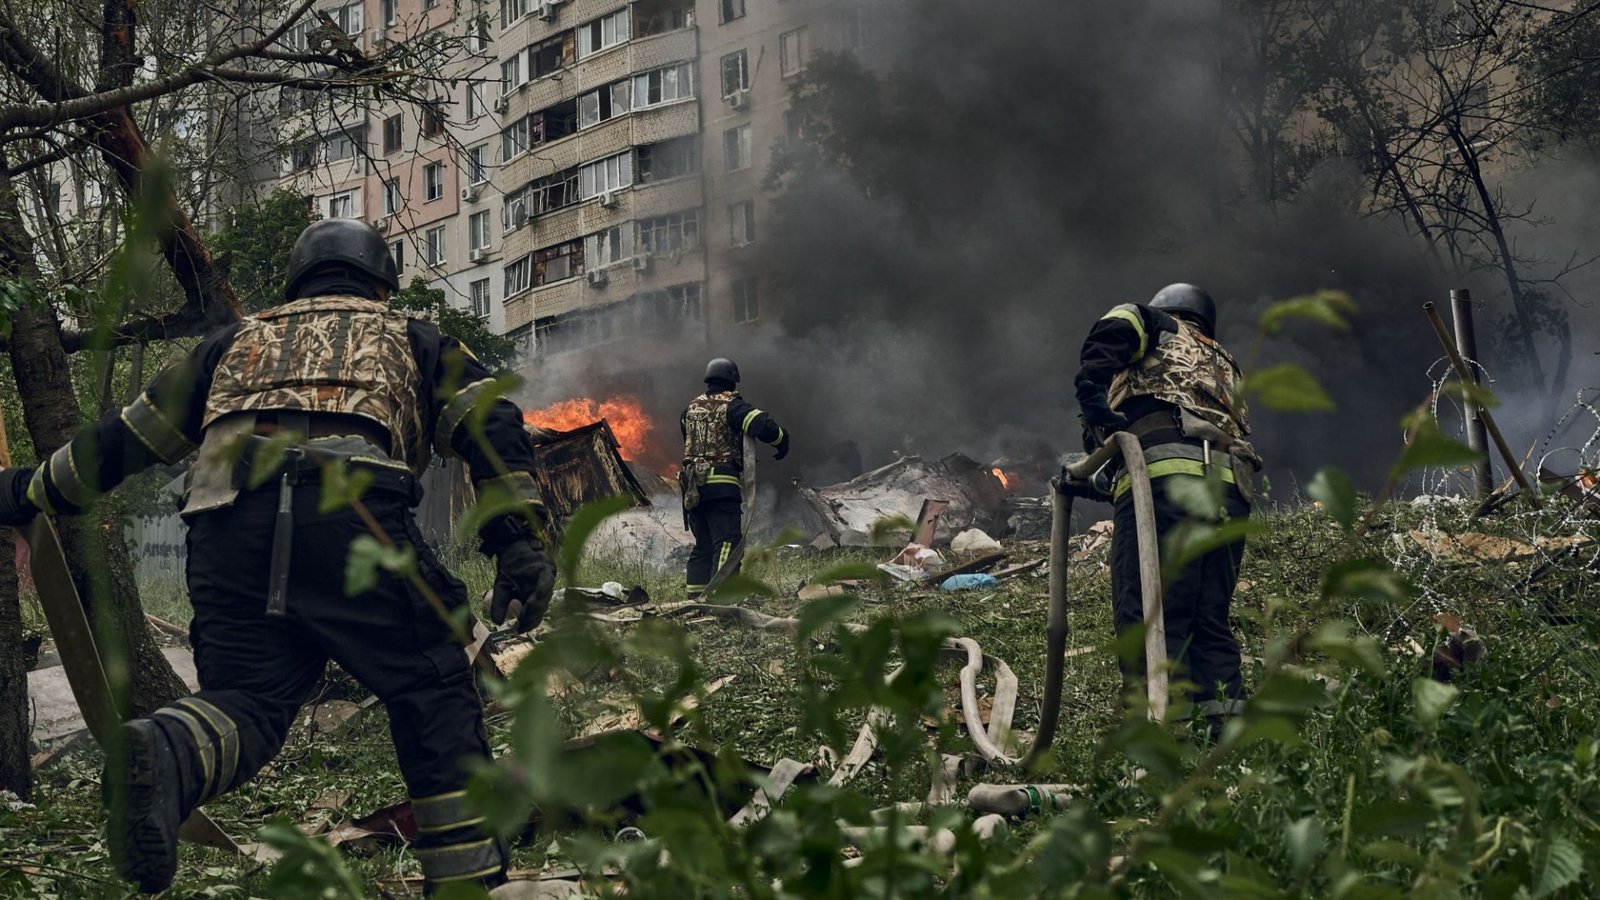 Ukraine’s second largest city Kharkiv is ‘under missile attack’, says mayor as Putin’s forces advance in new offensive